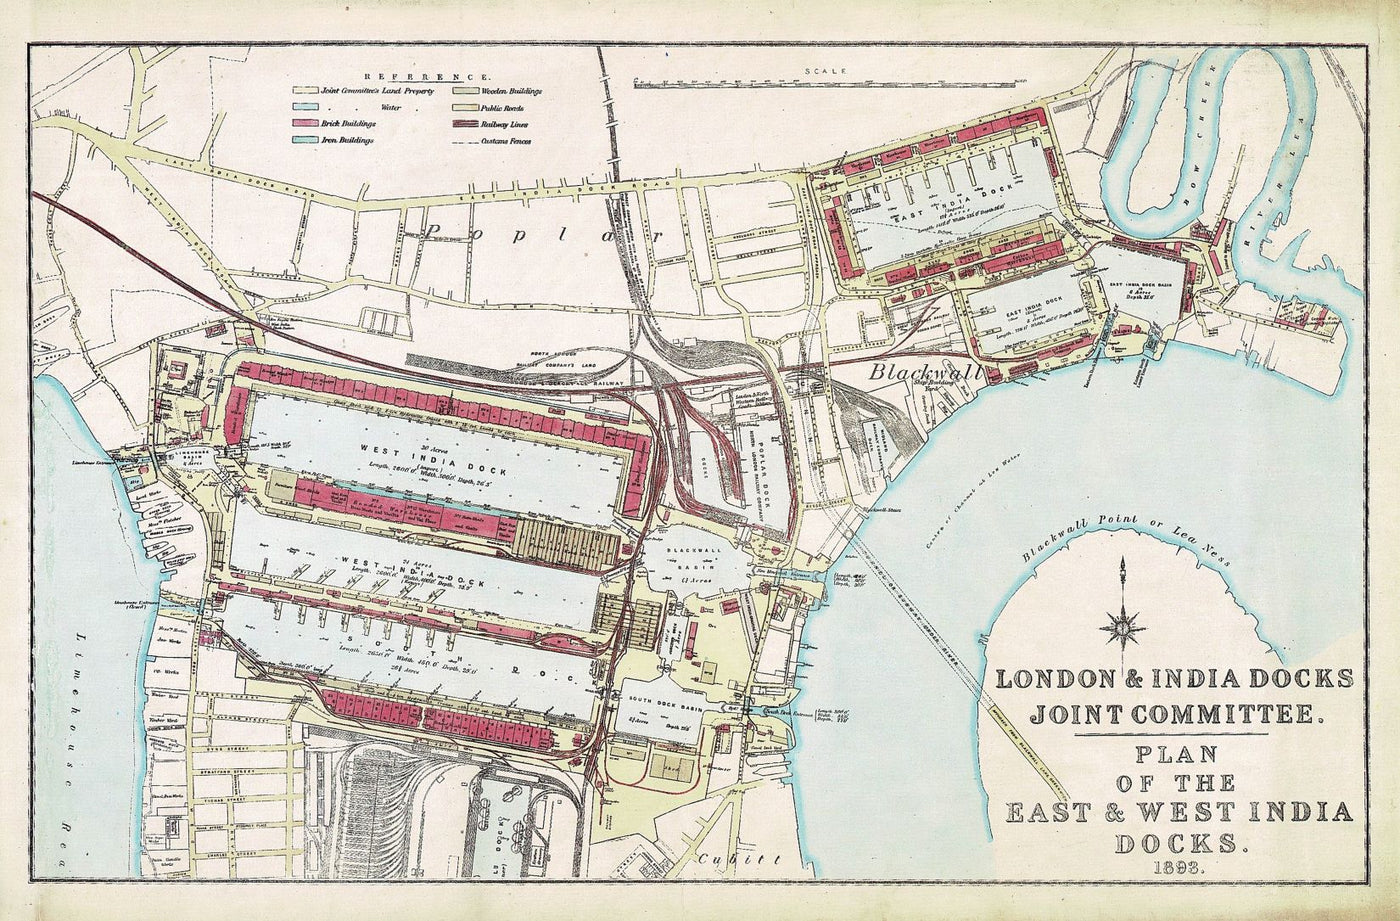 East and West India Docks Plan, 1893